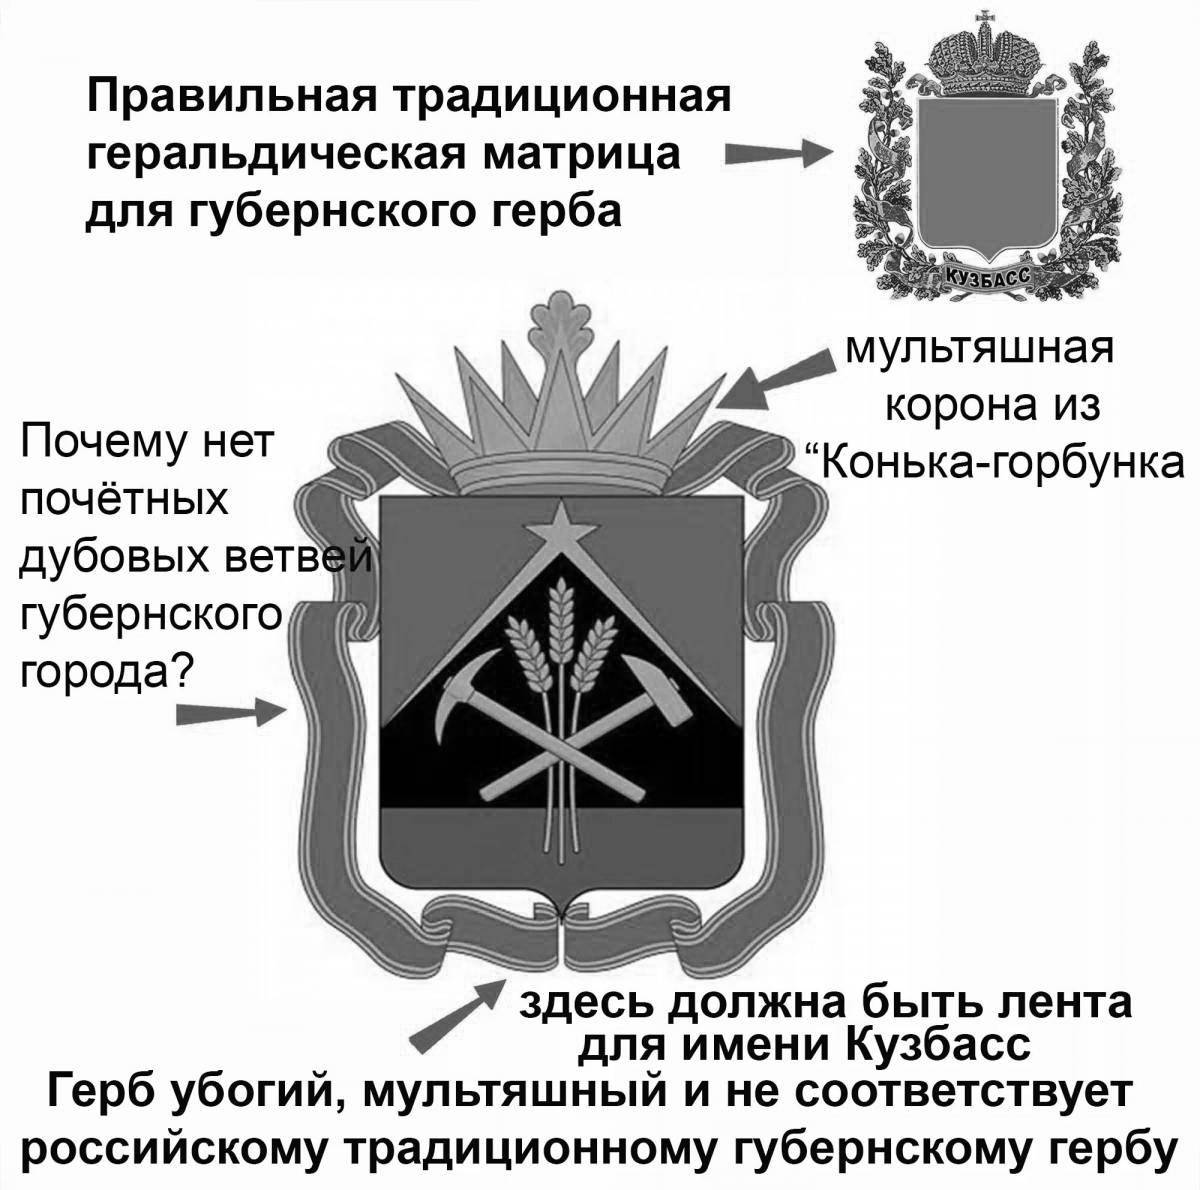 Charming coat of arms of Kuzbass for kids